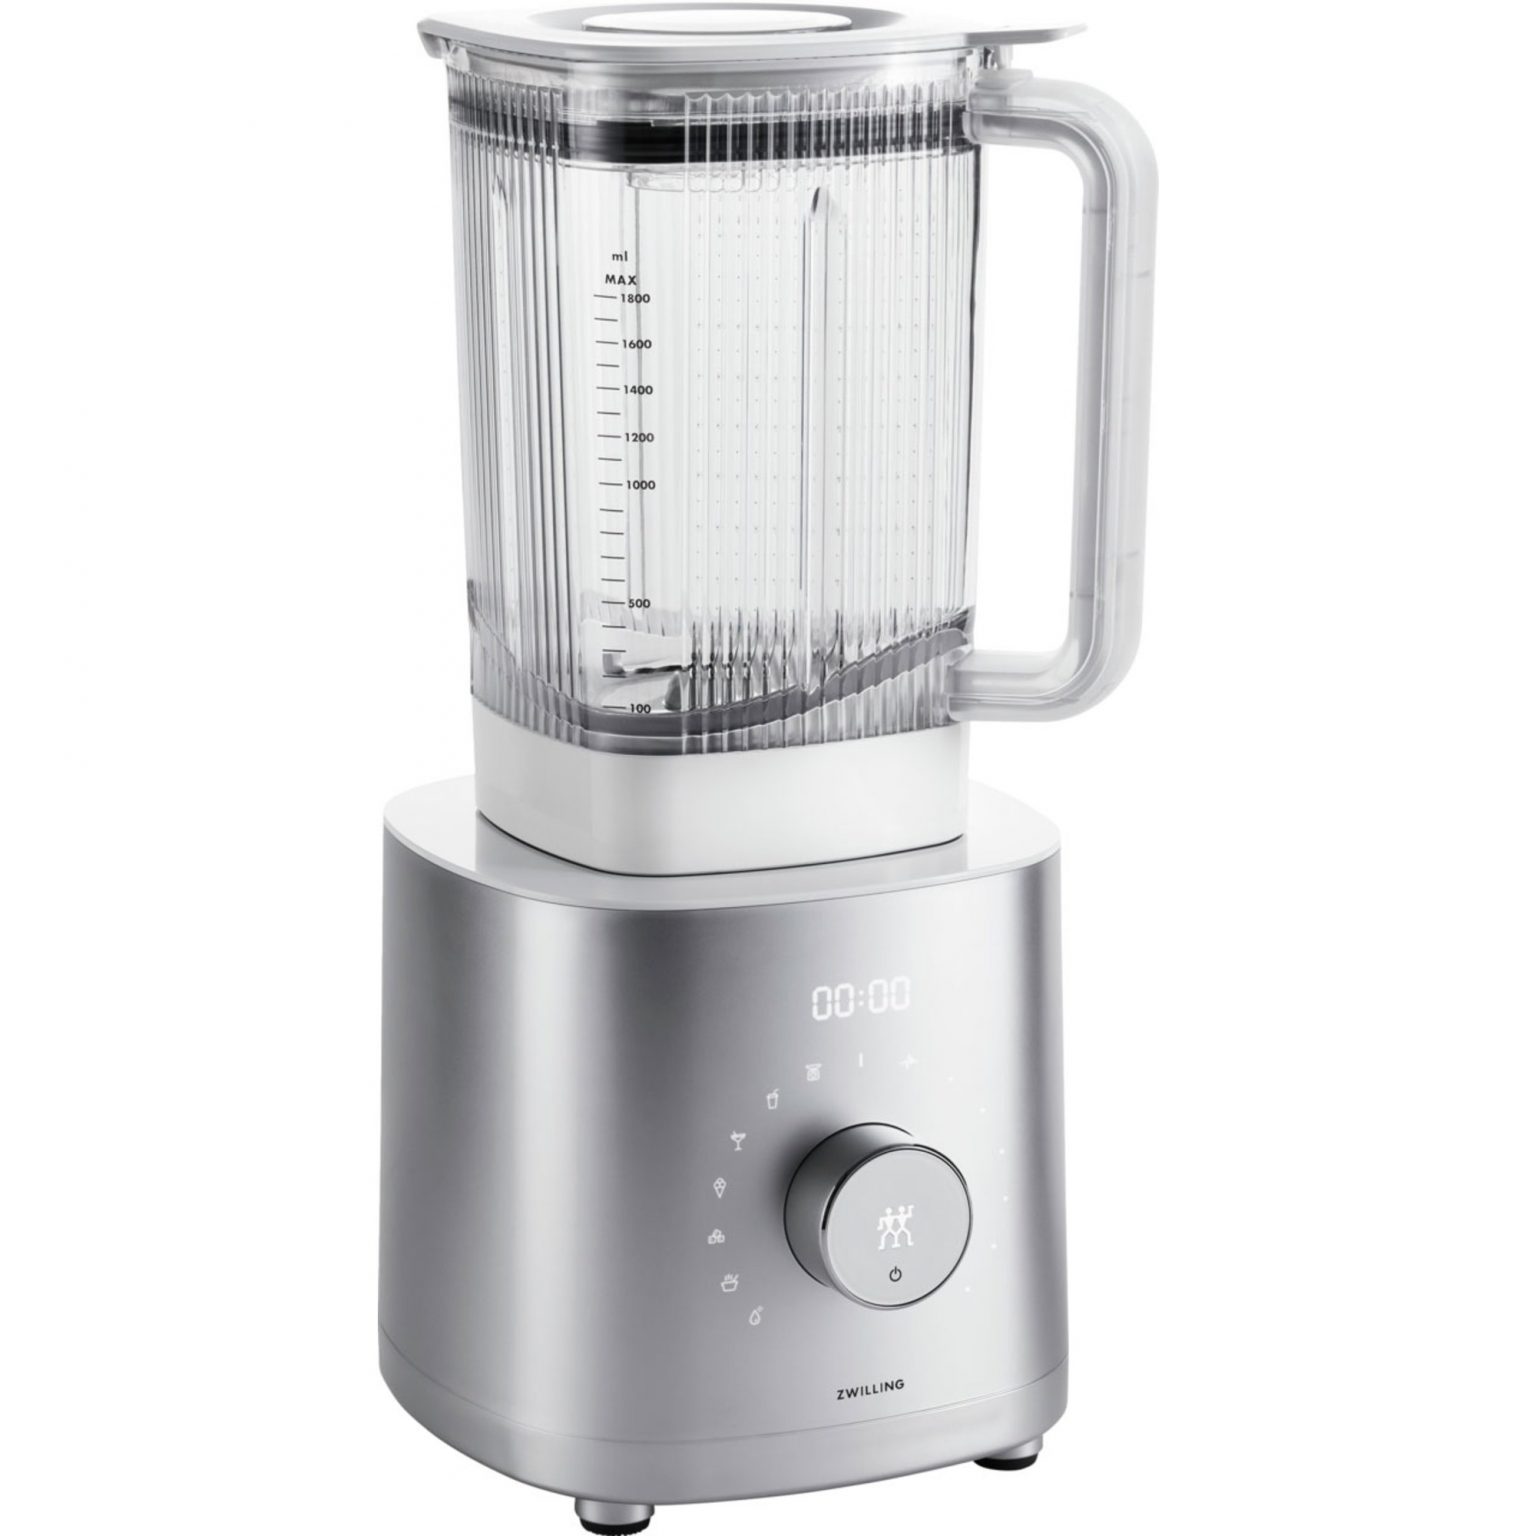 Zwilling Enfinigy Pro powerblender